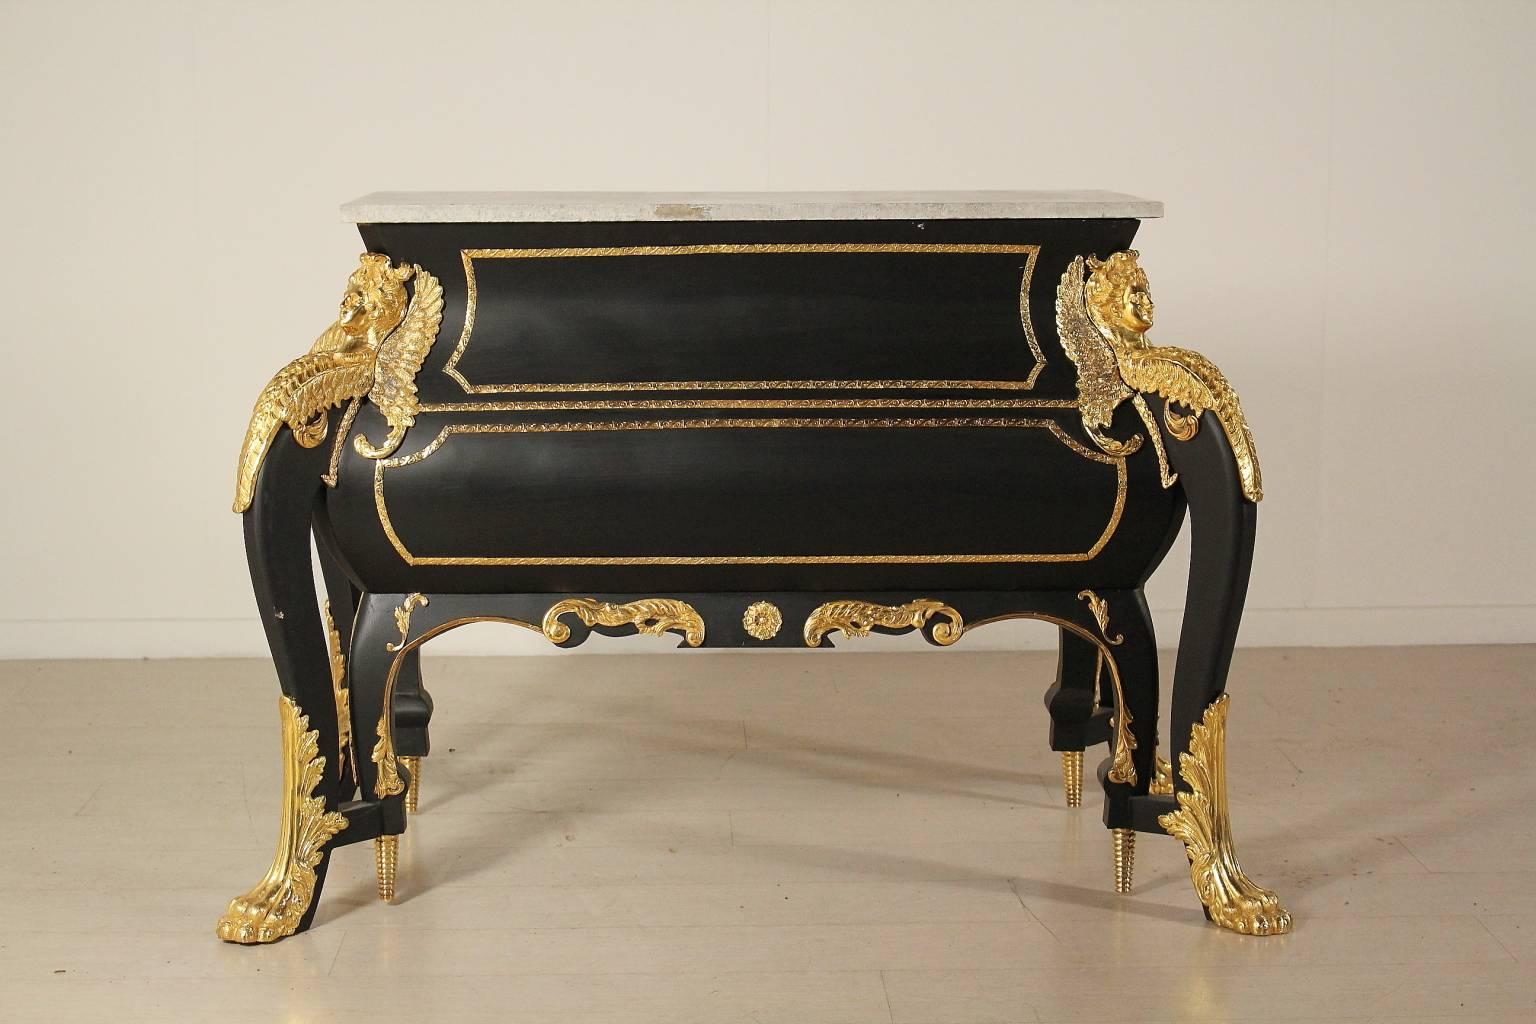 A chest of drawers, copy of the well-known chest of drawers made by C. Boulle and placed now at Vaux-le-Vicomte castle. Moved line, four pairs of legs and two drawers. Brass friezes, marble top. Manufactured in Italy, second half of the 20th century.